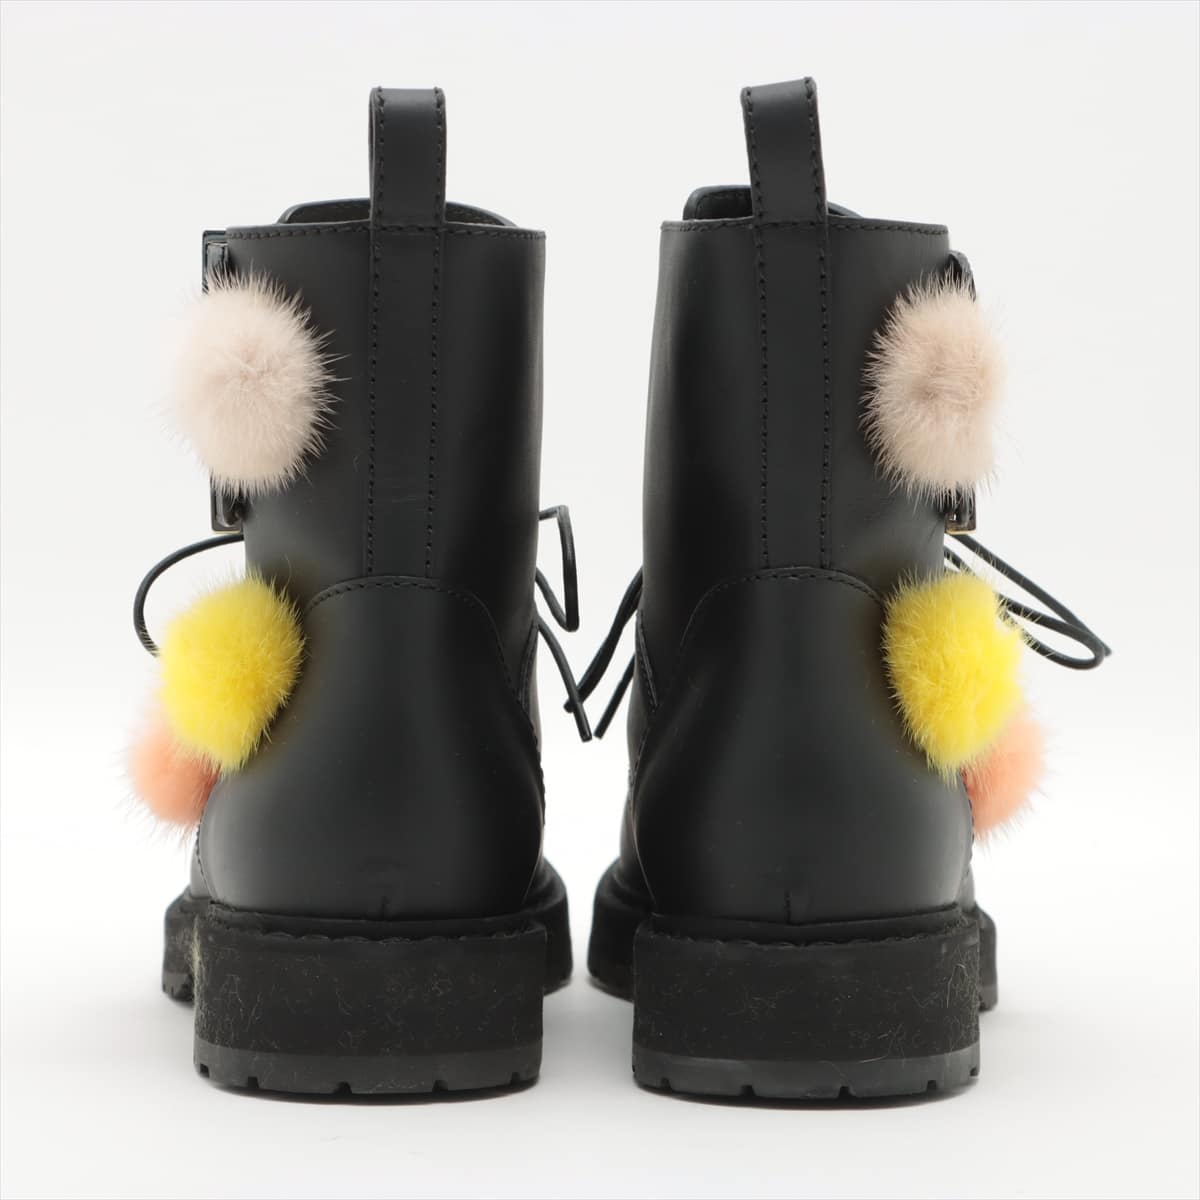 Fendi Leather Boots 37 Ladies' Black Fur There is a box